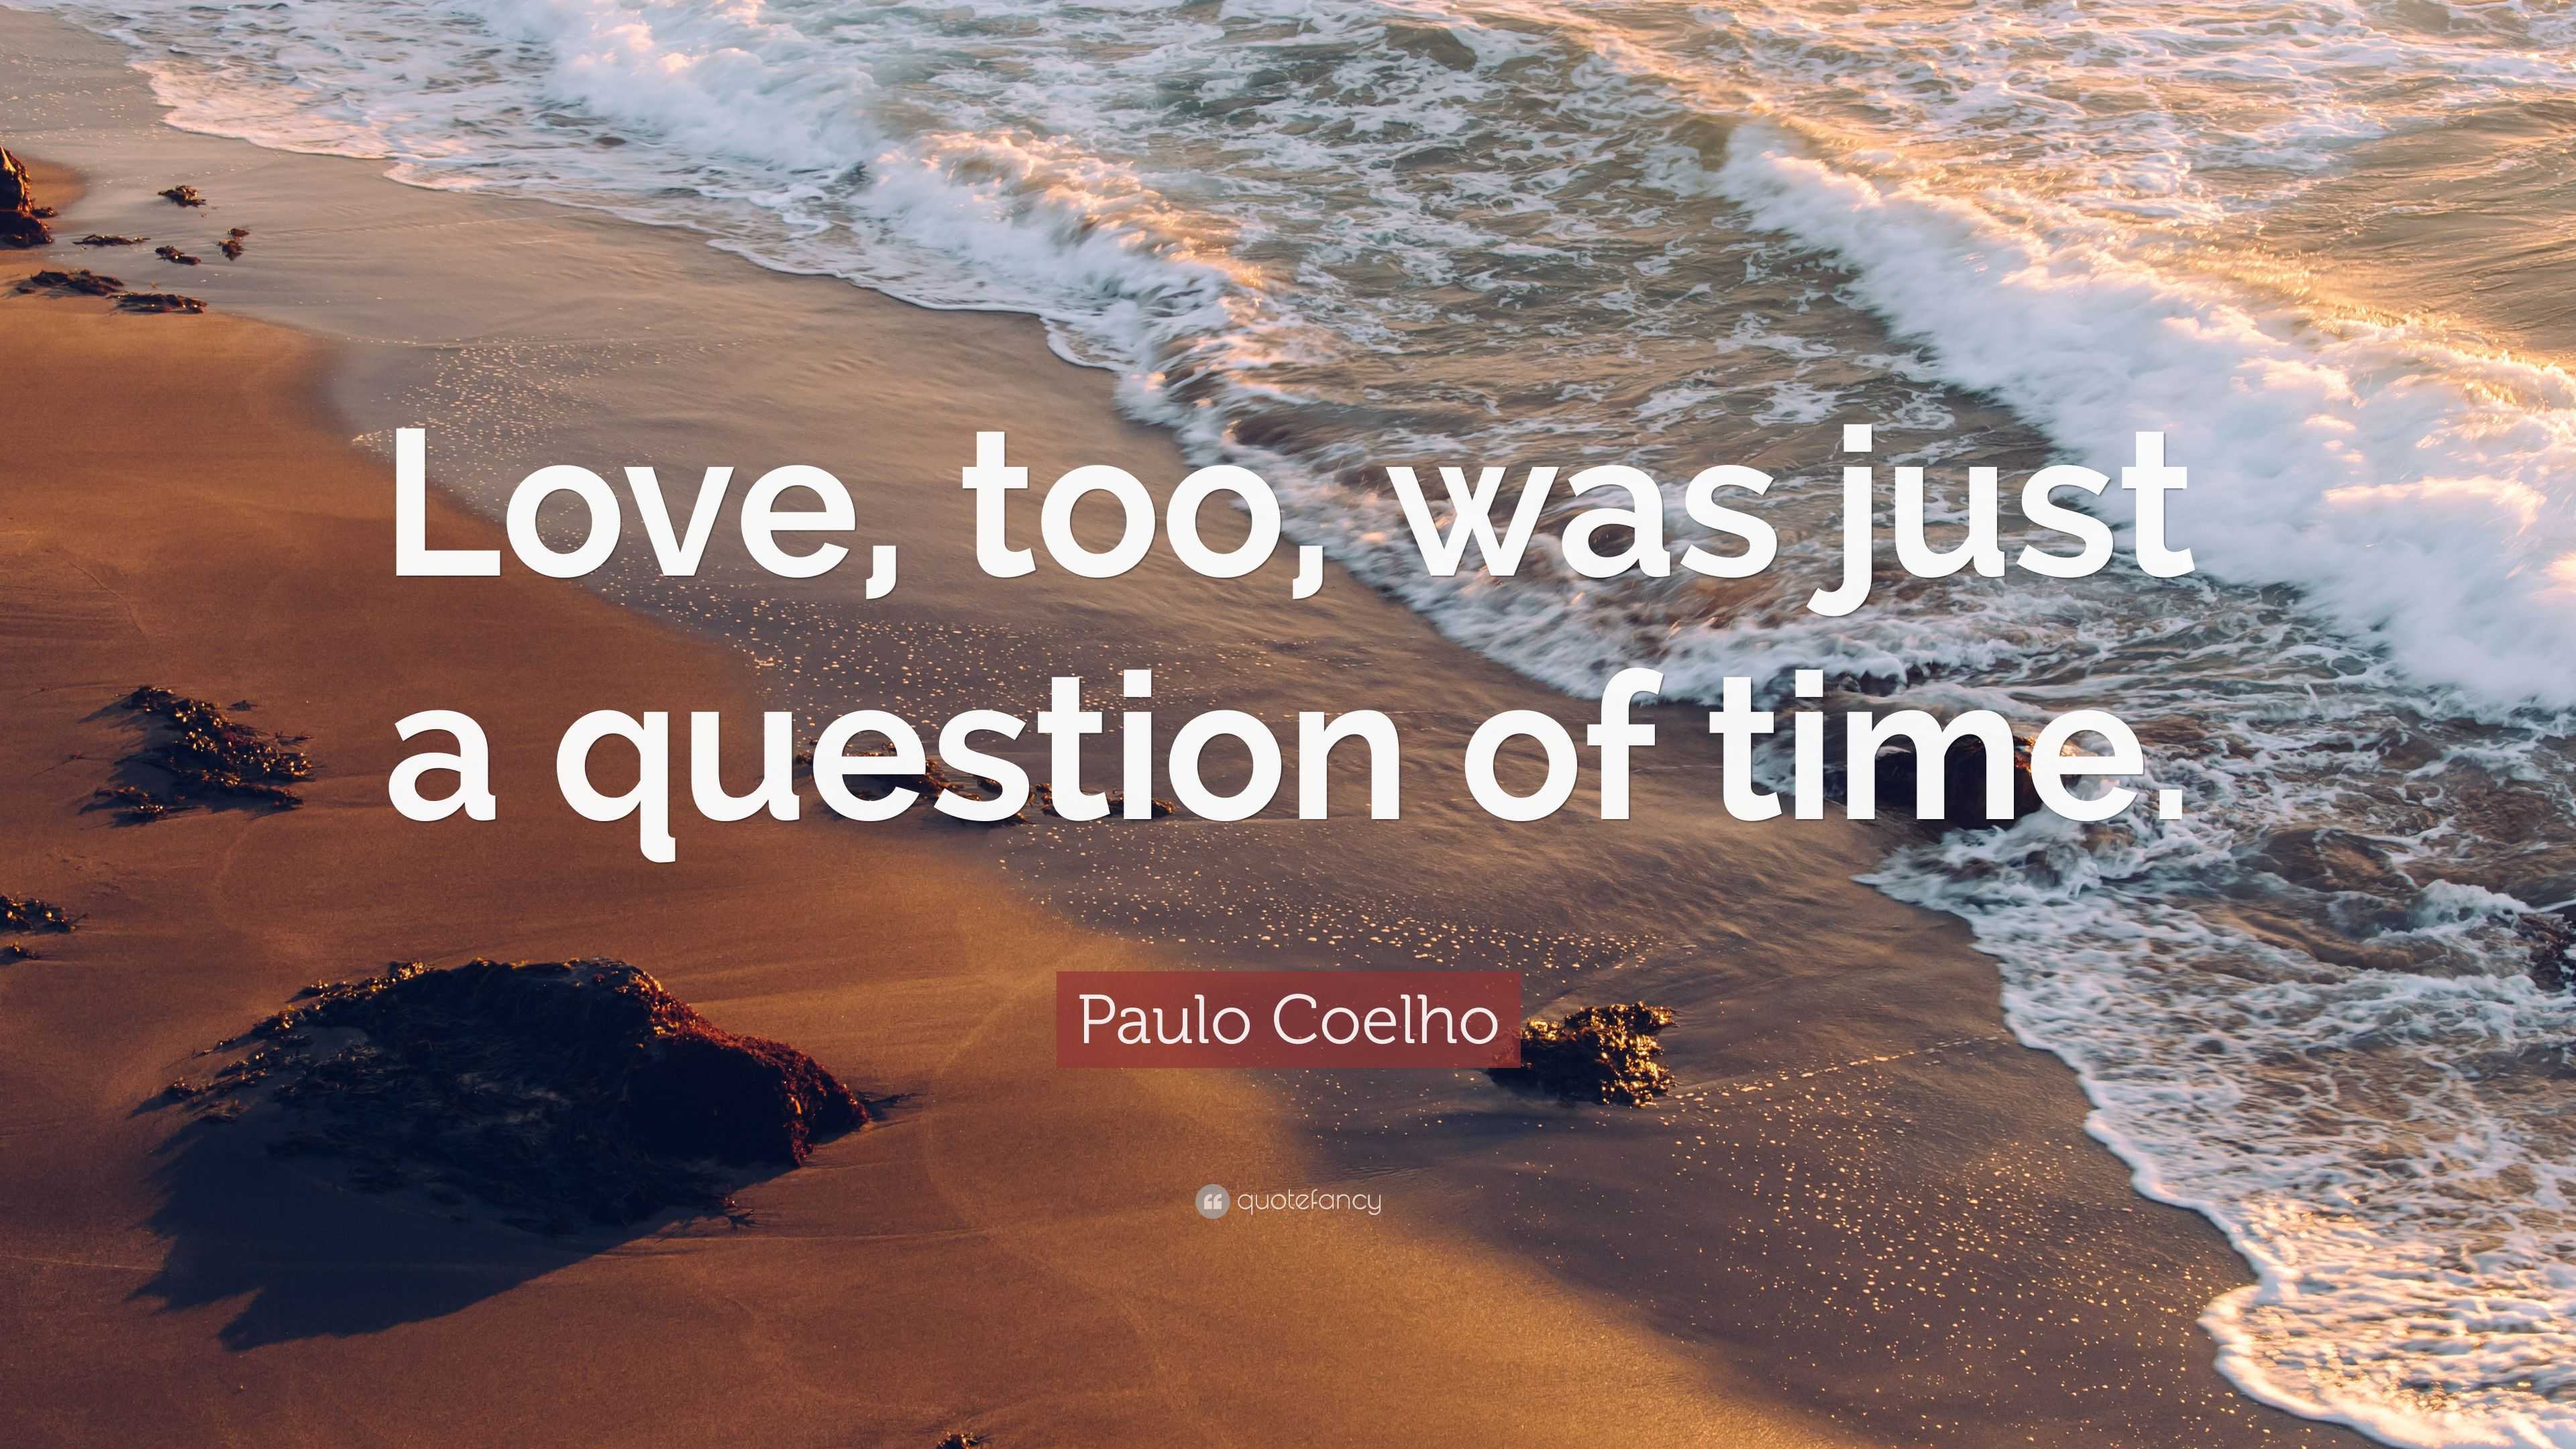 Paulo Coelho Quote: “Love, too, was just a question of time.”